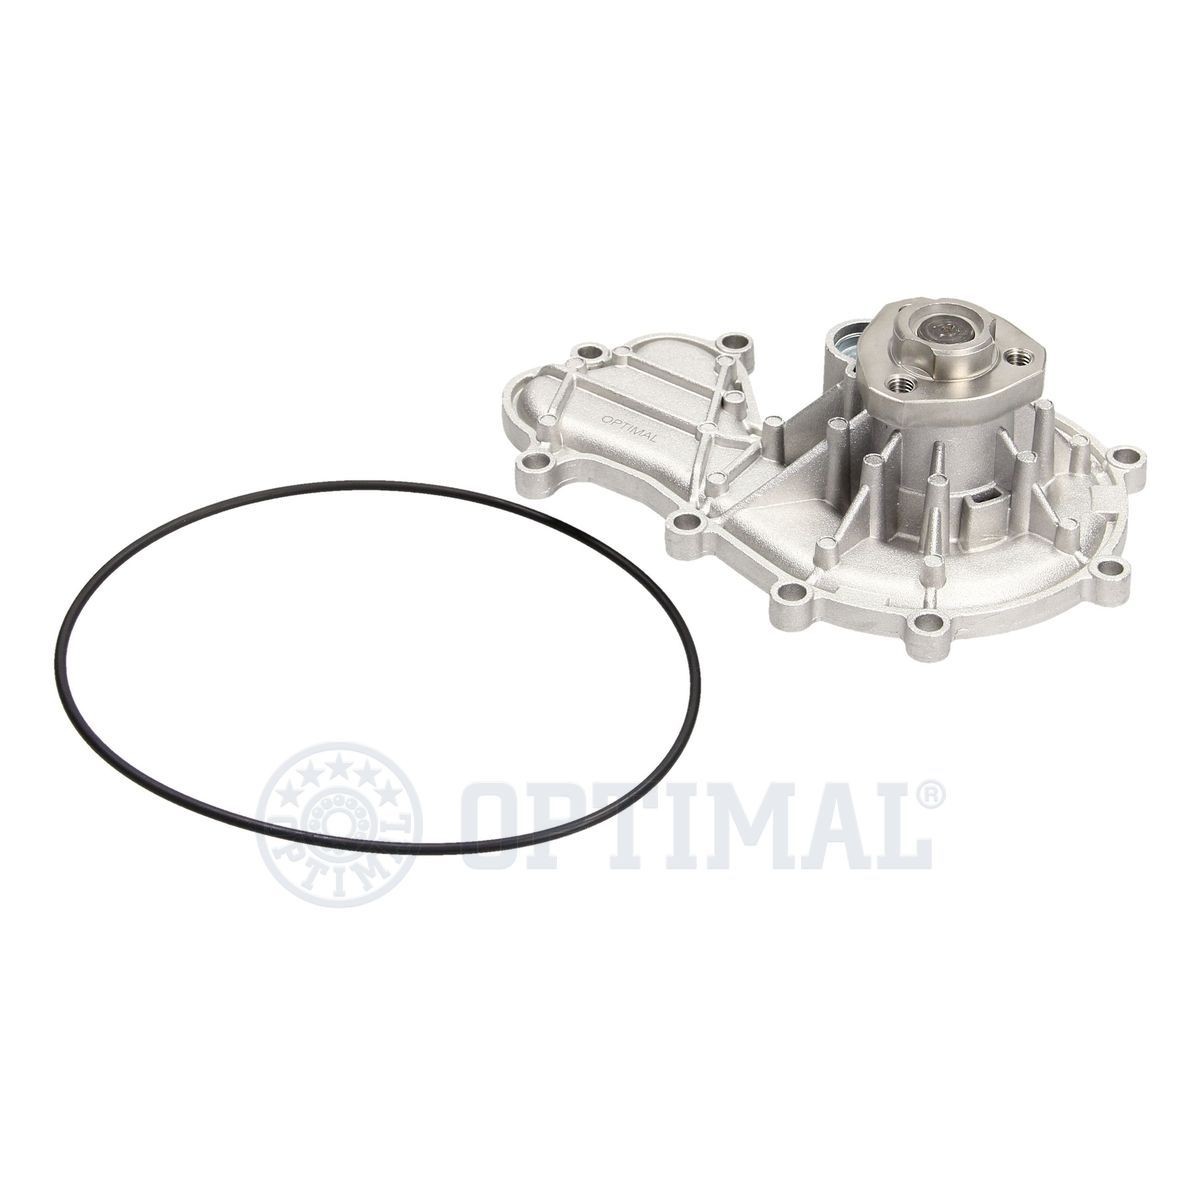 OPTIMAL Water pump for engine AQ-2426